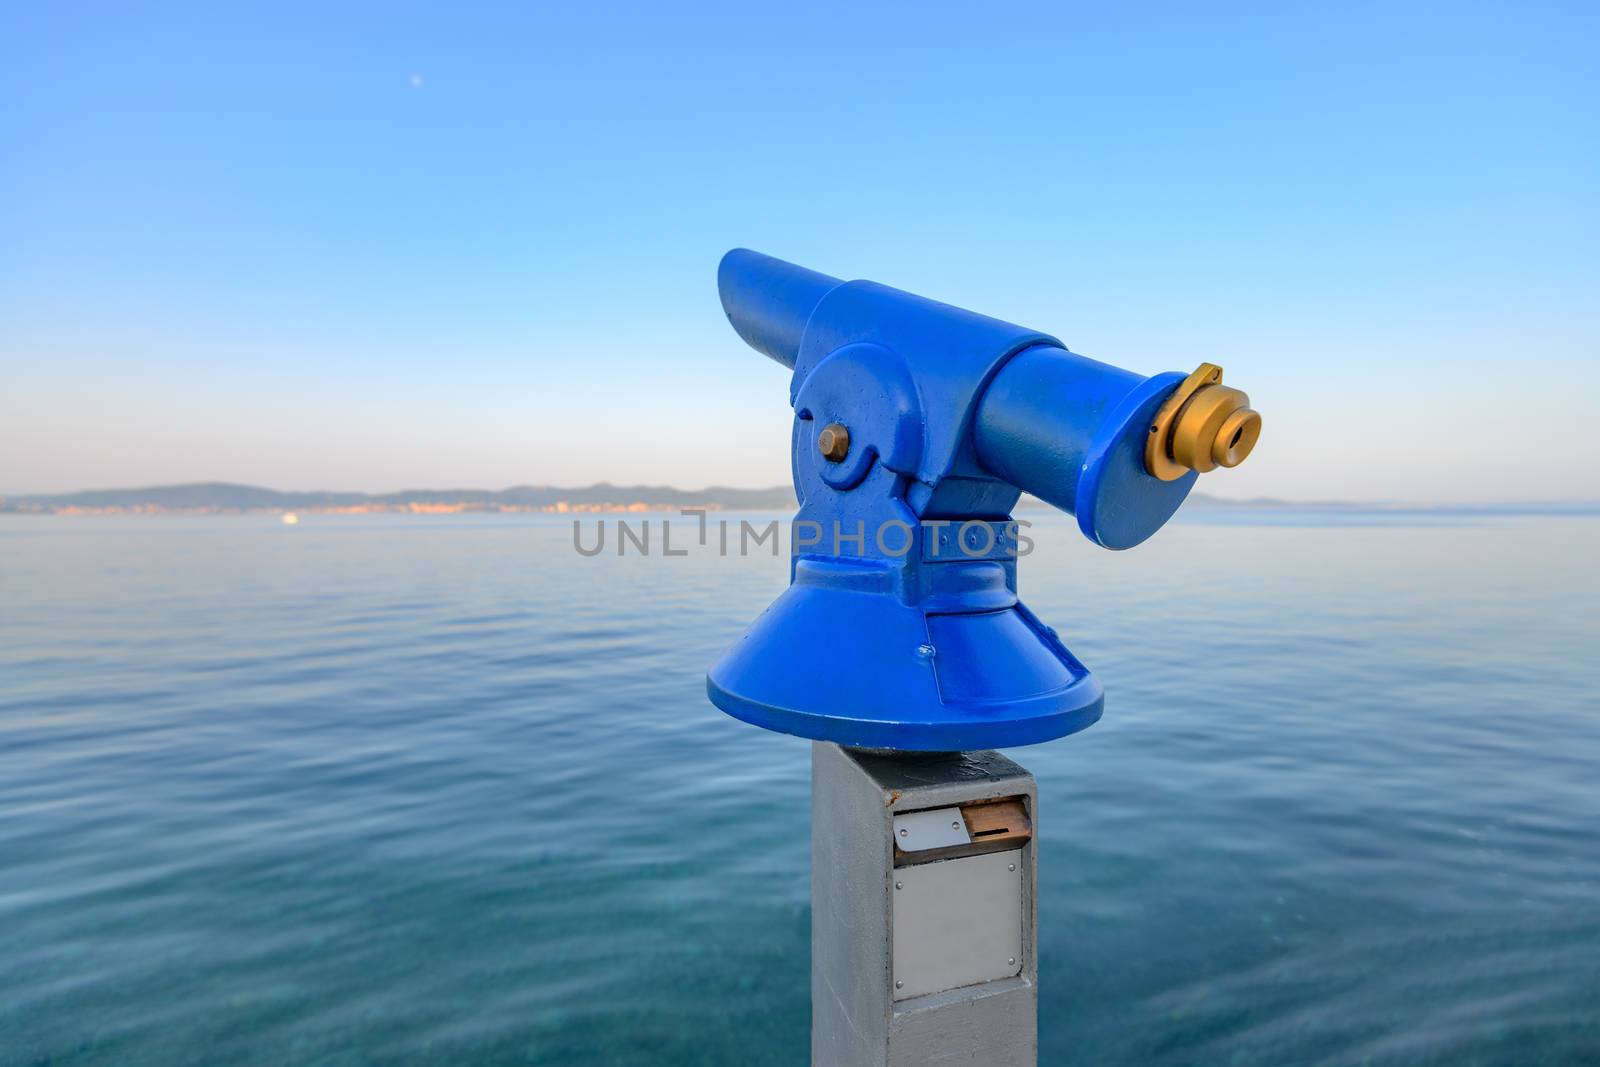 Blue public coin operated telescope, sea and island in background by asafaric